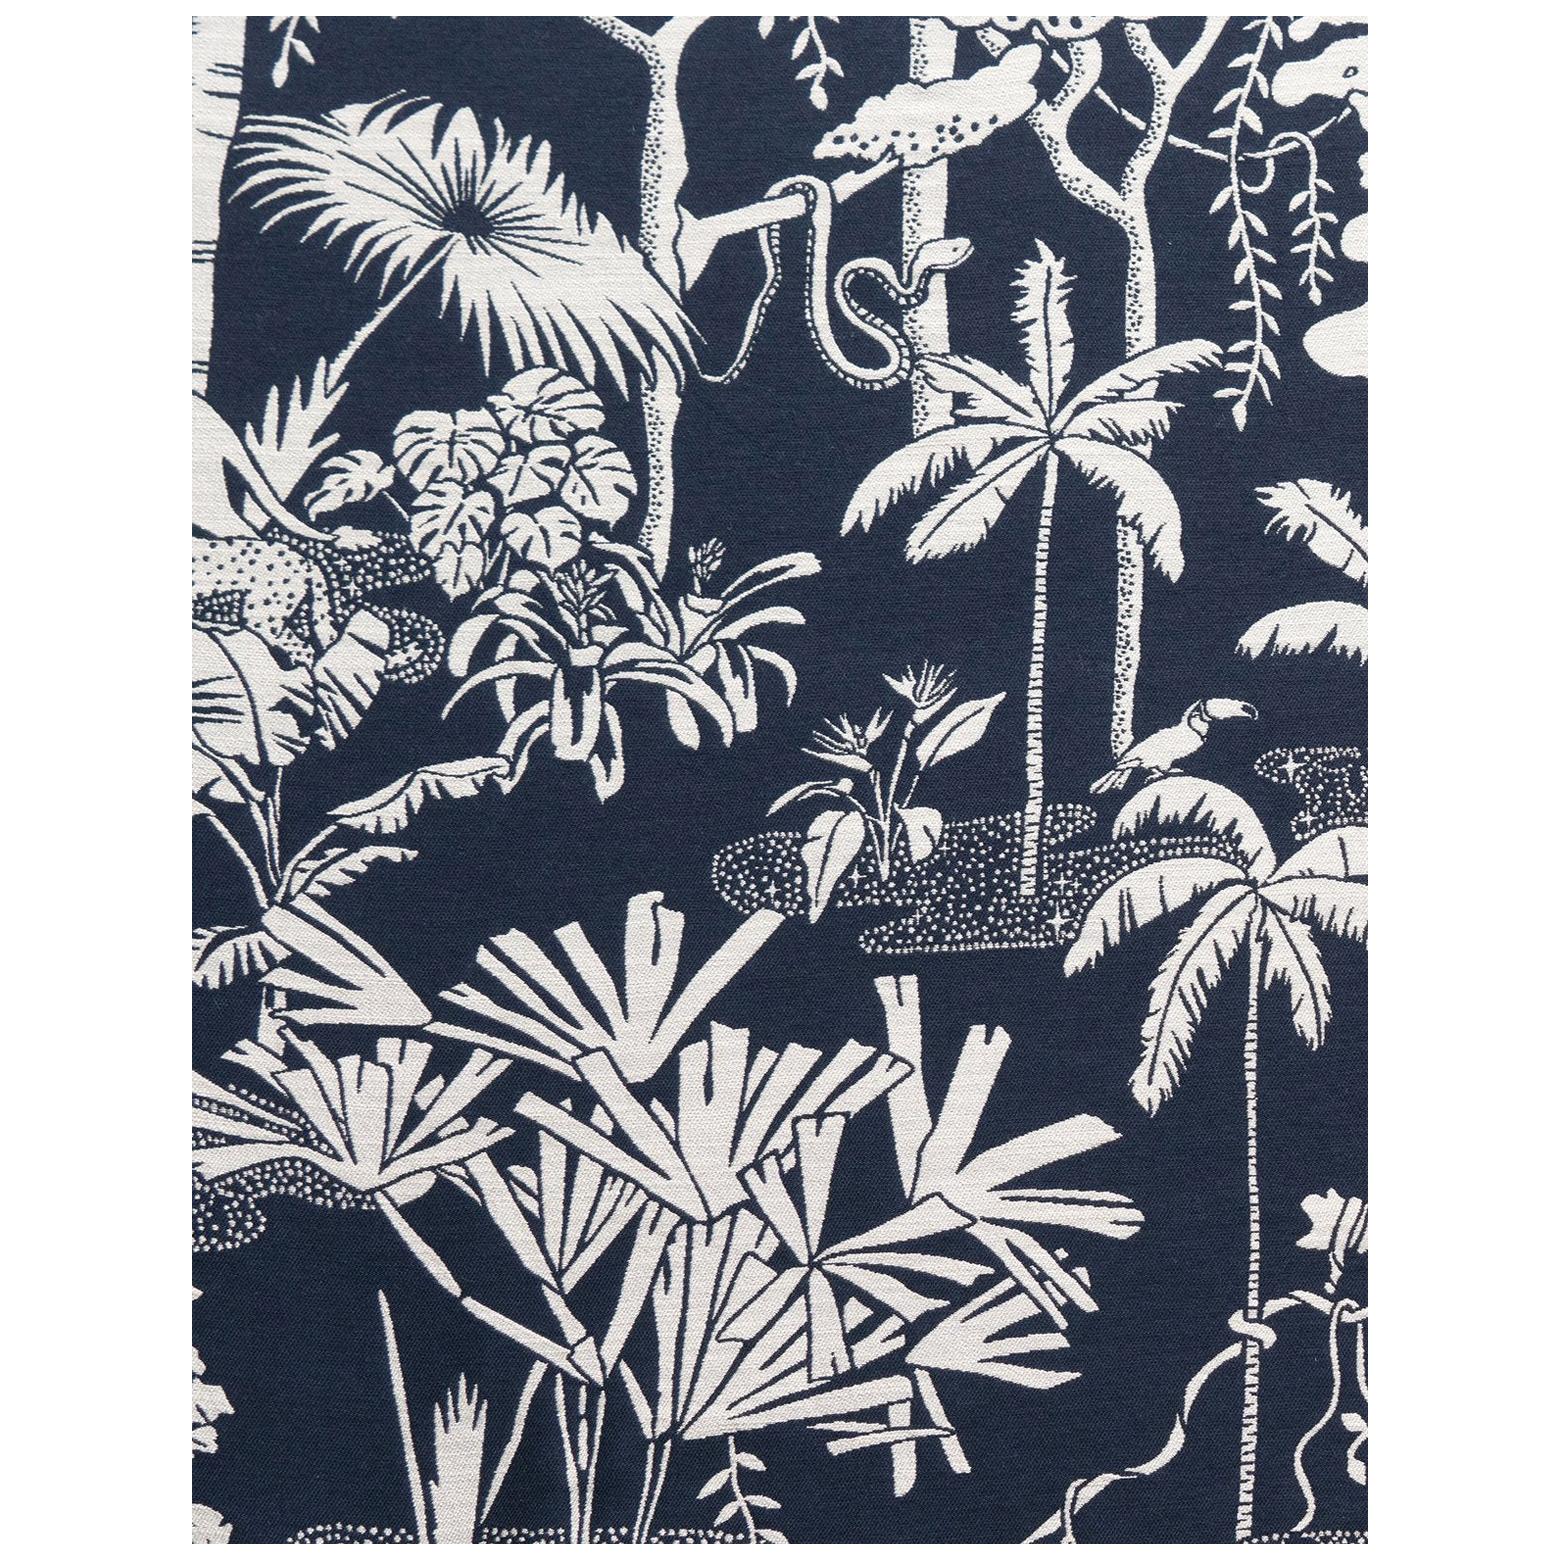 Jungle Dream Woven Commercial Grade Fabric in Oxford, White and Navy For Sale